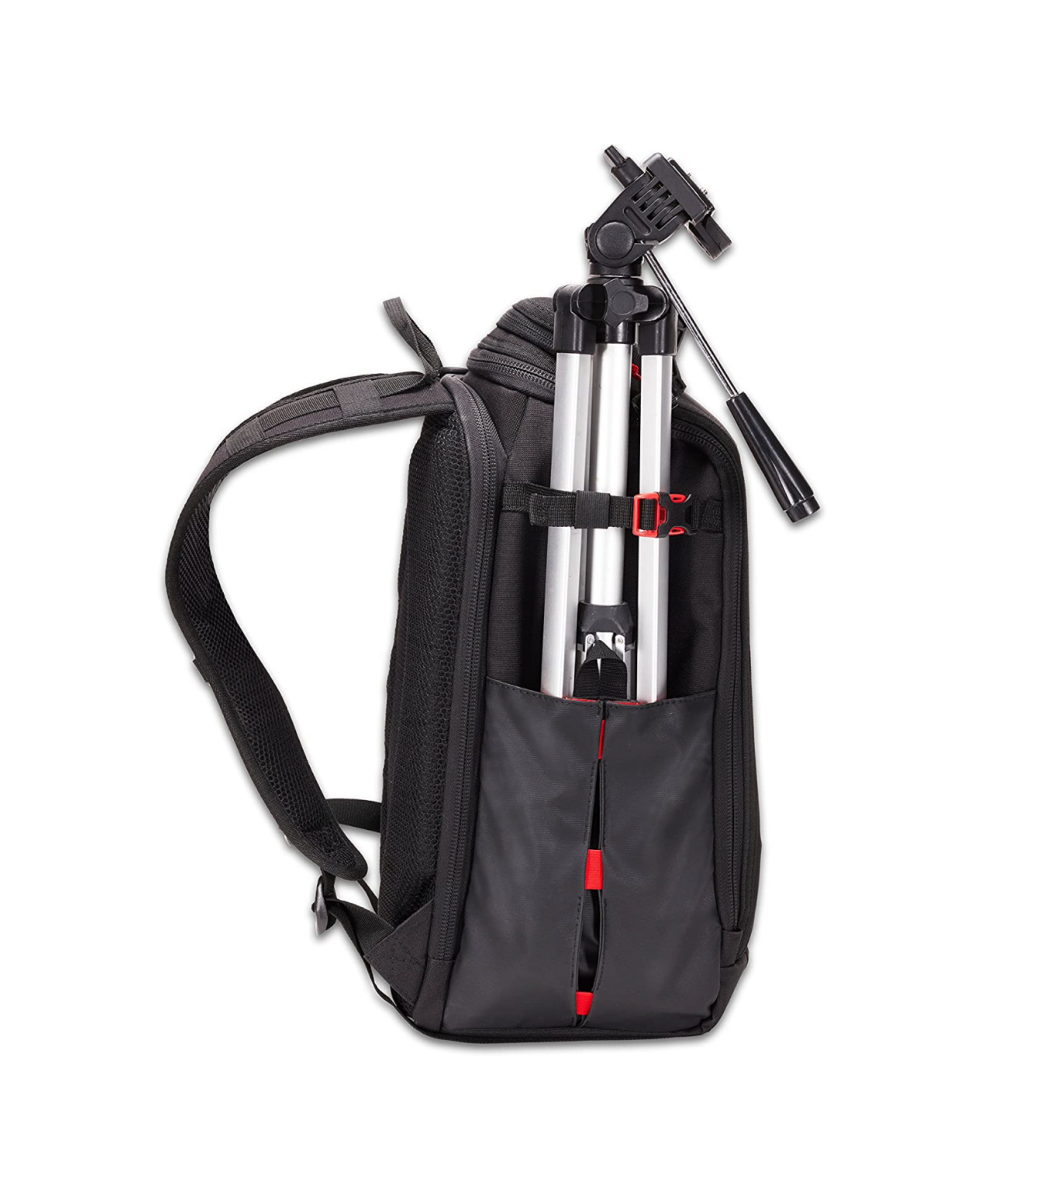 A Voltaic Systems OffGrid Solar Backpack Charger with a camera tripod in the side pocket